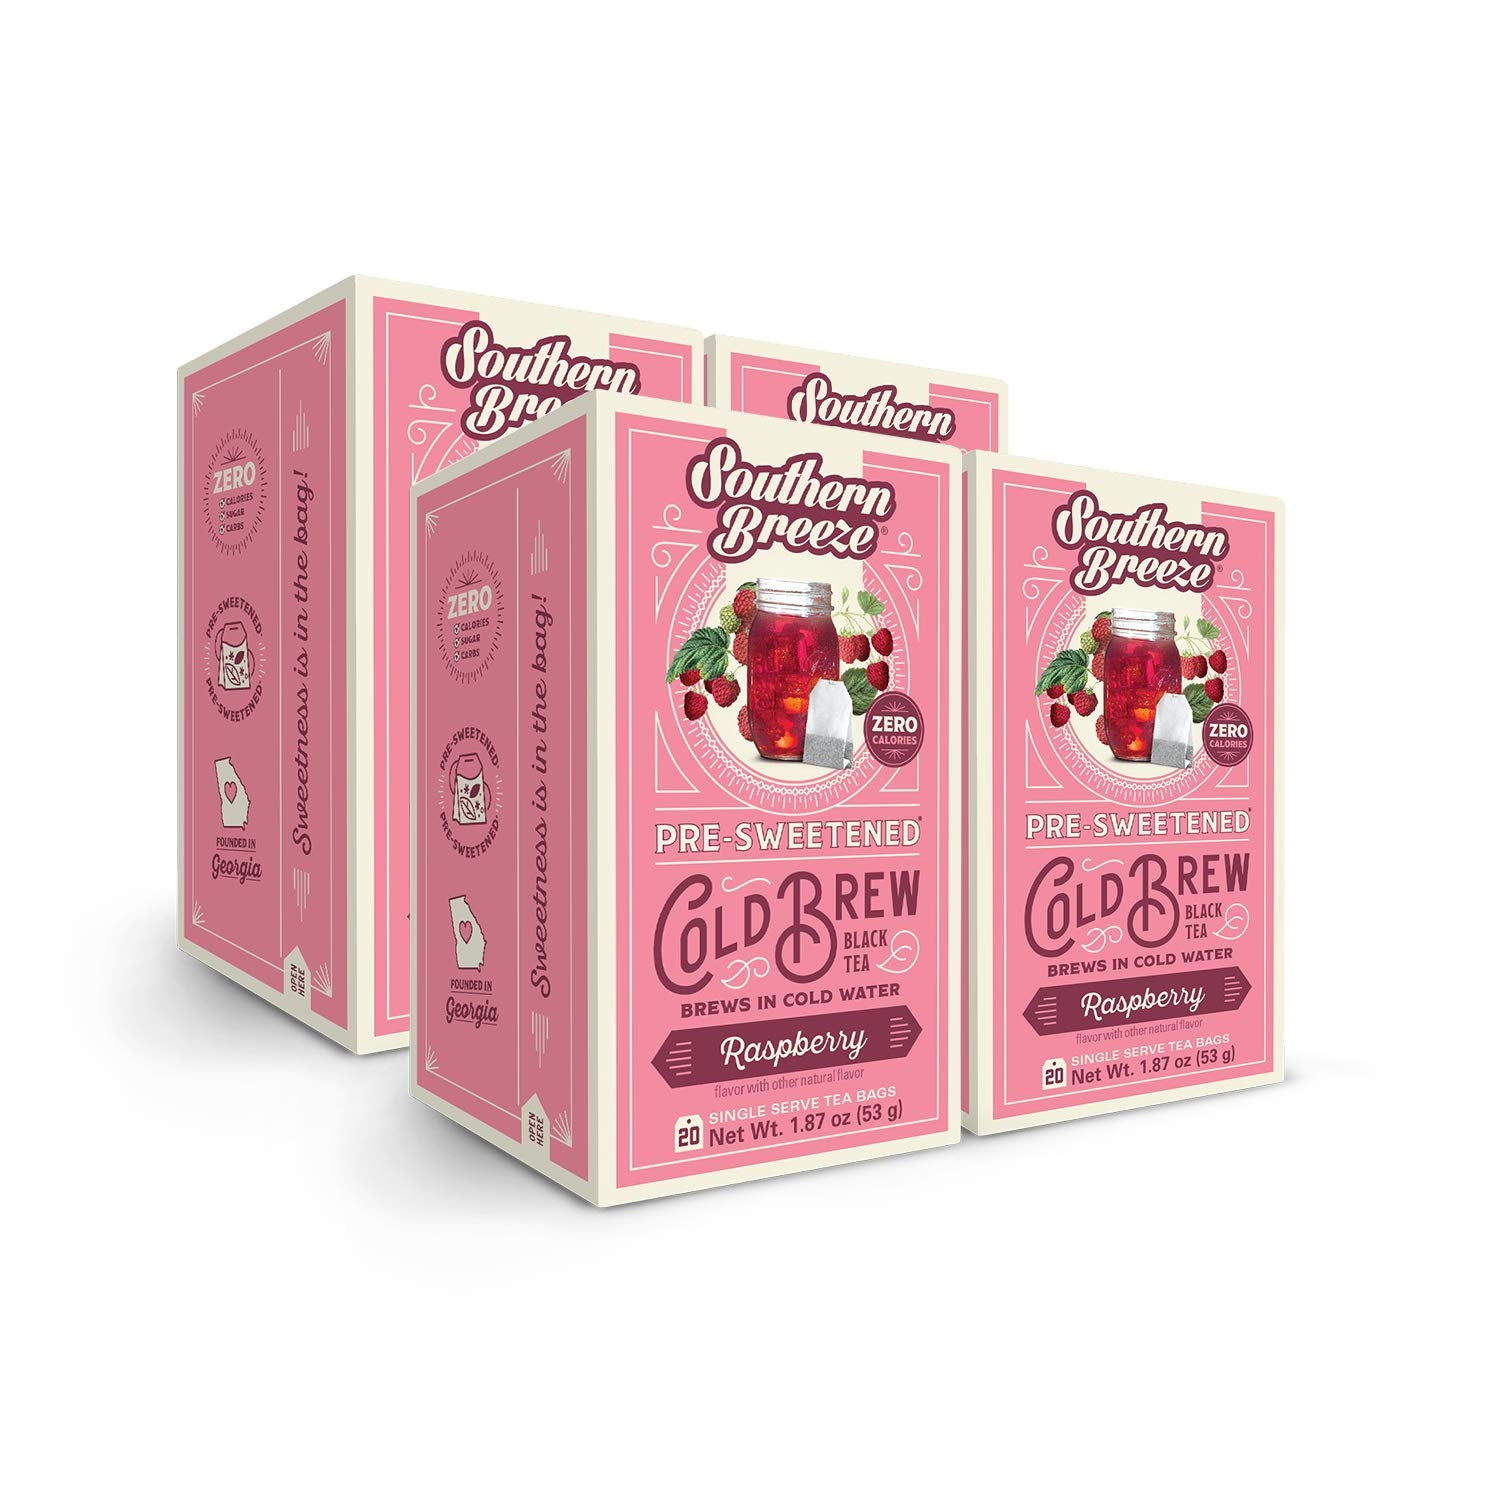 Southern Breeze Cold Brew Sweet Tea Raspberry Iced Tea with Black Tea and Zero Carbs Zero Sugar, 20 Individually Wrapped Tea Bags, Pack of 4